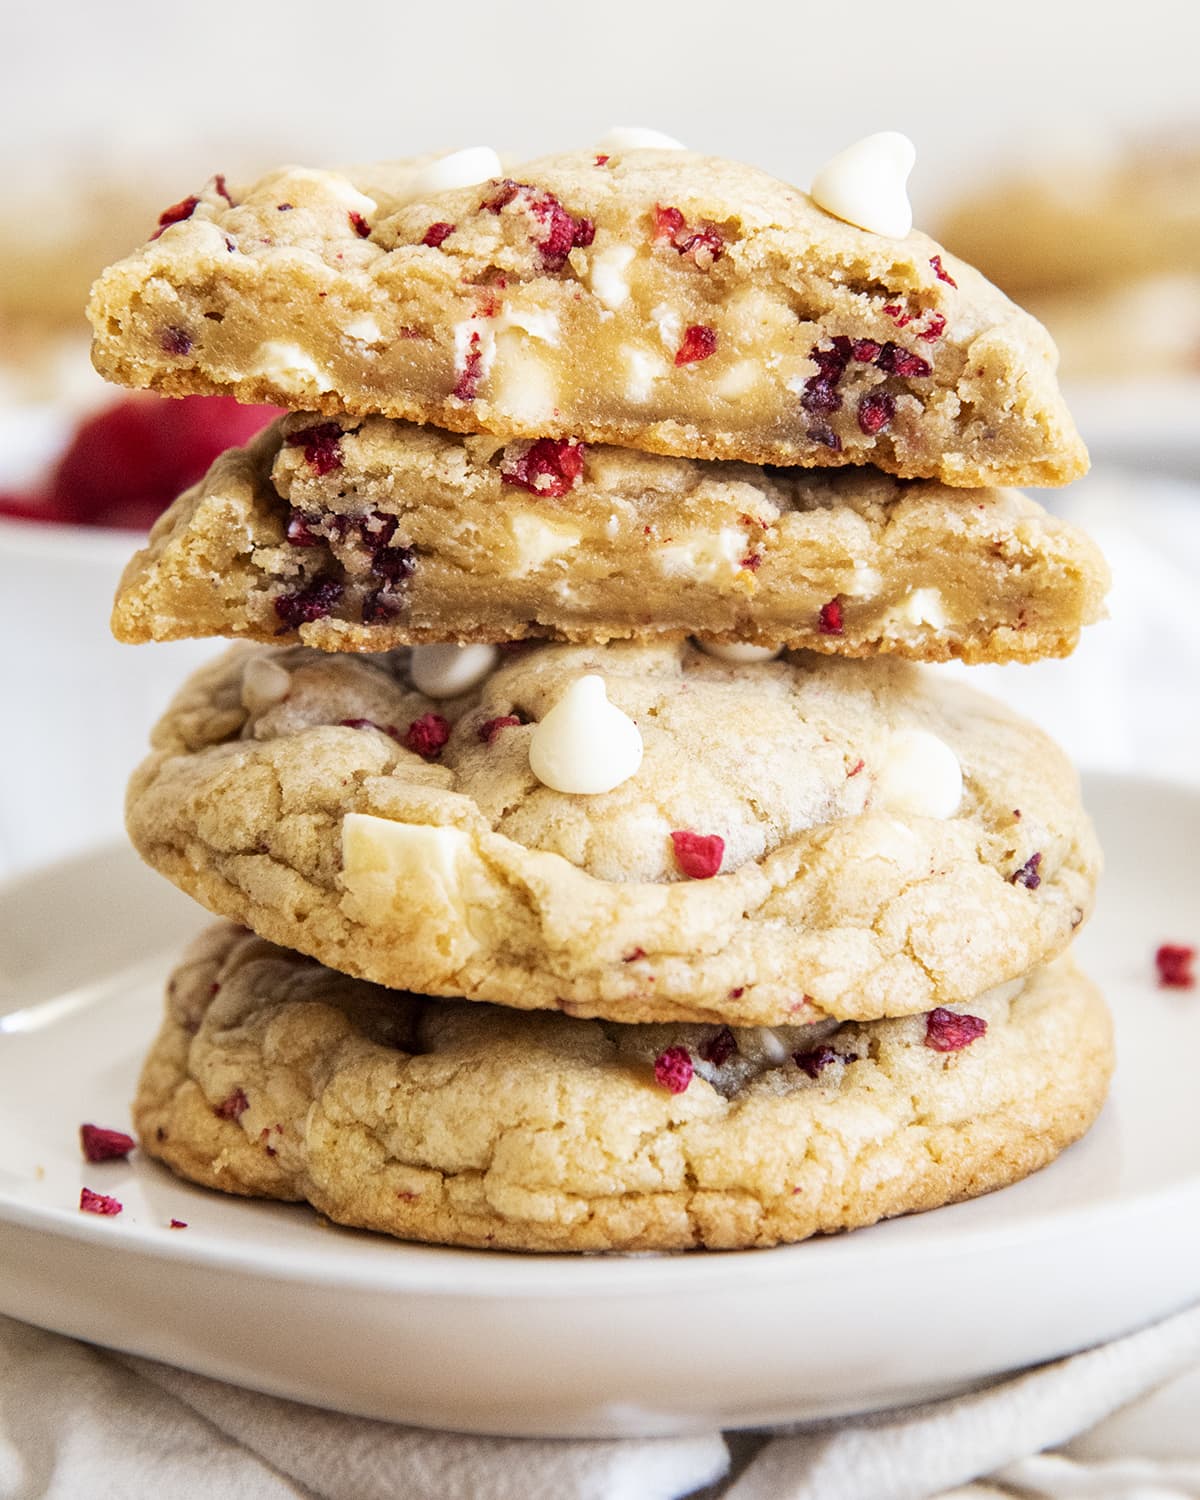 White chocolate raspberry cookies onn a plate stacked high. The top cookie is cut in half to reveal the raspberries and white chocolate chips within.